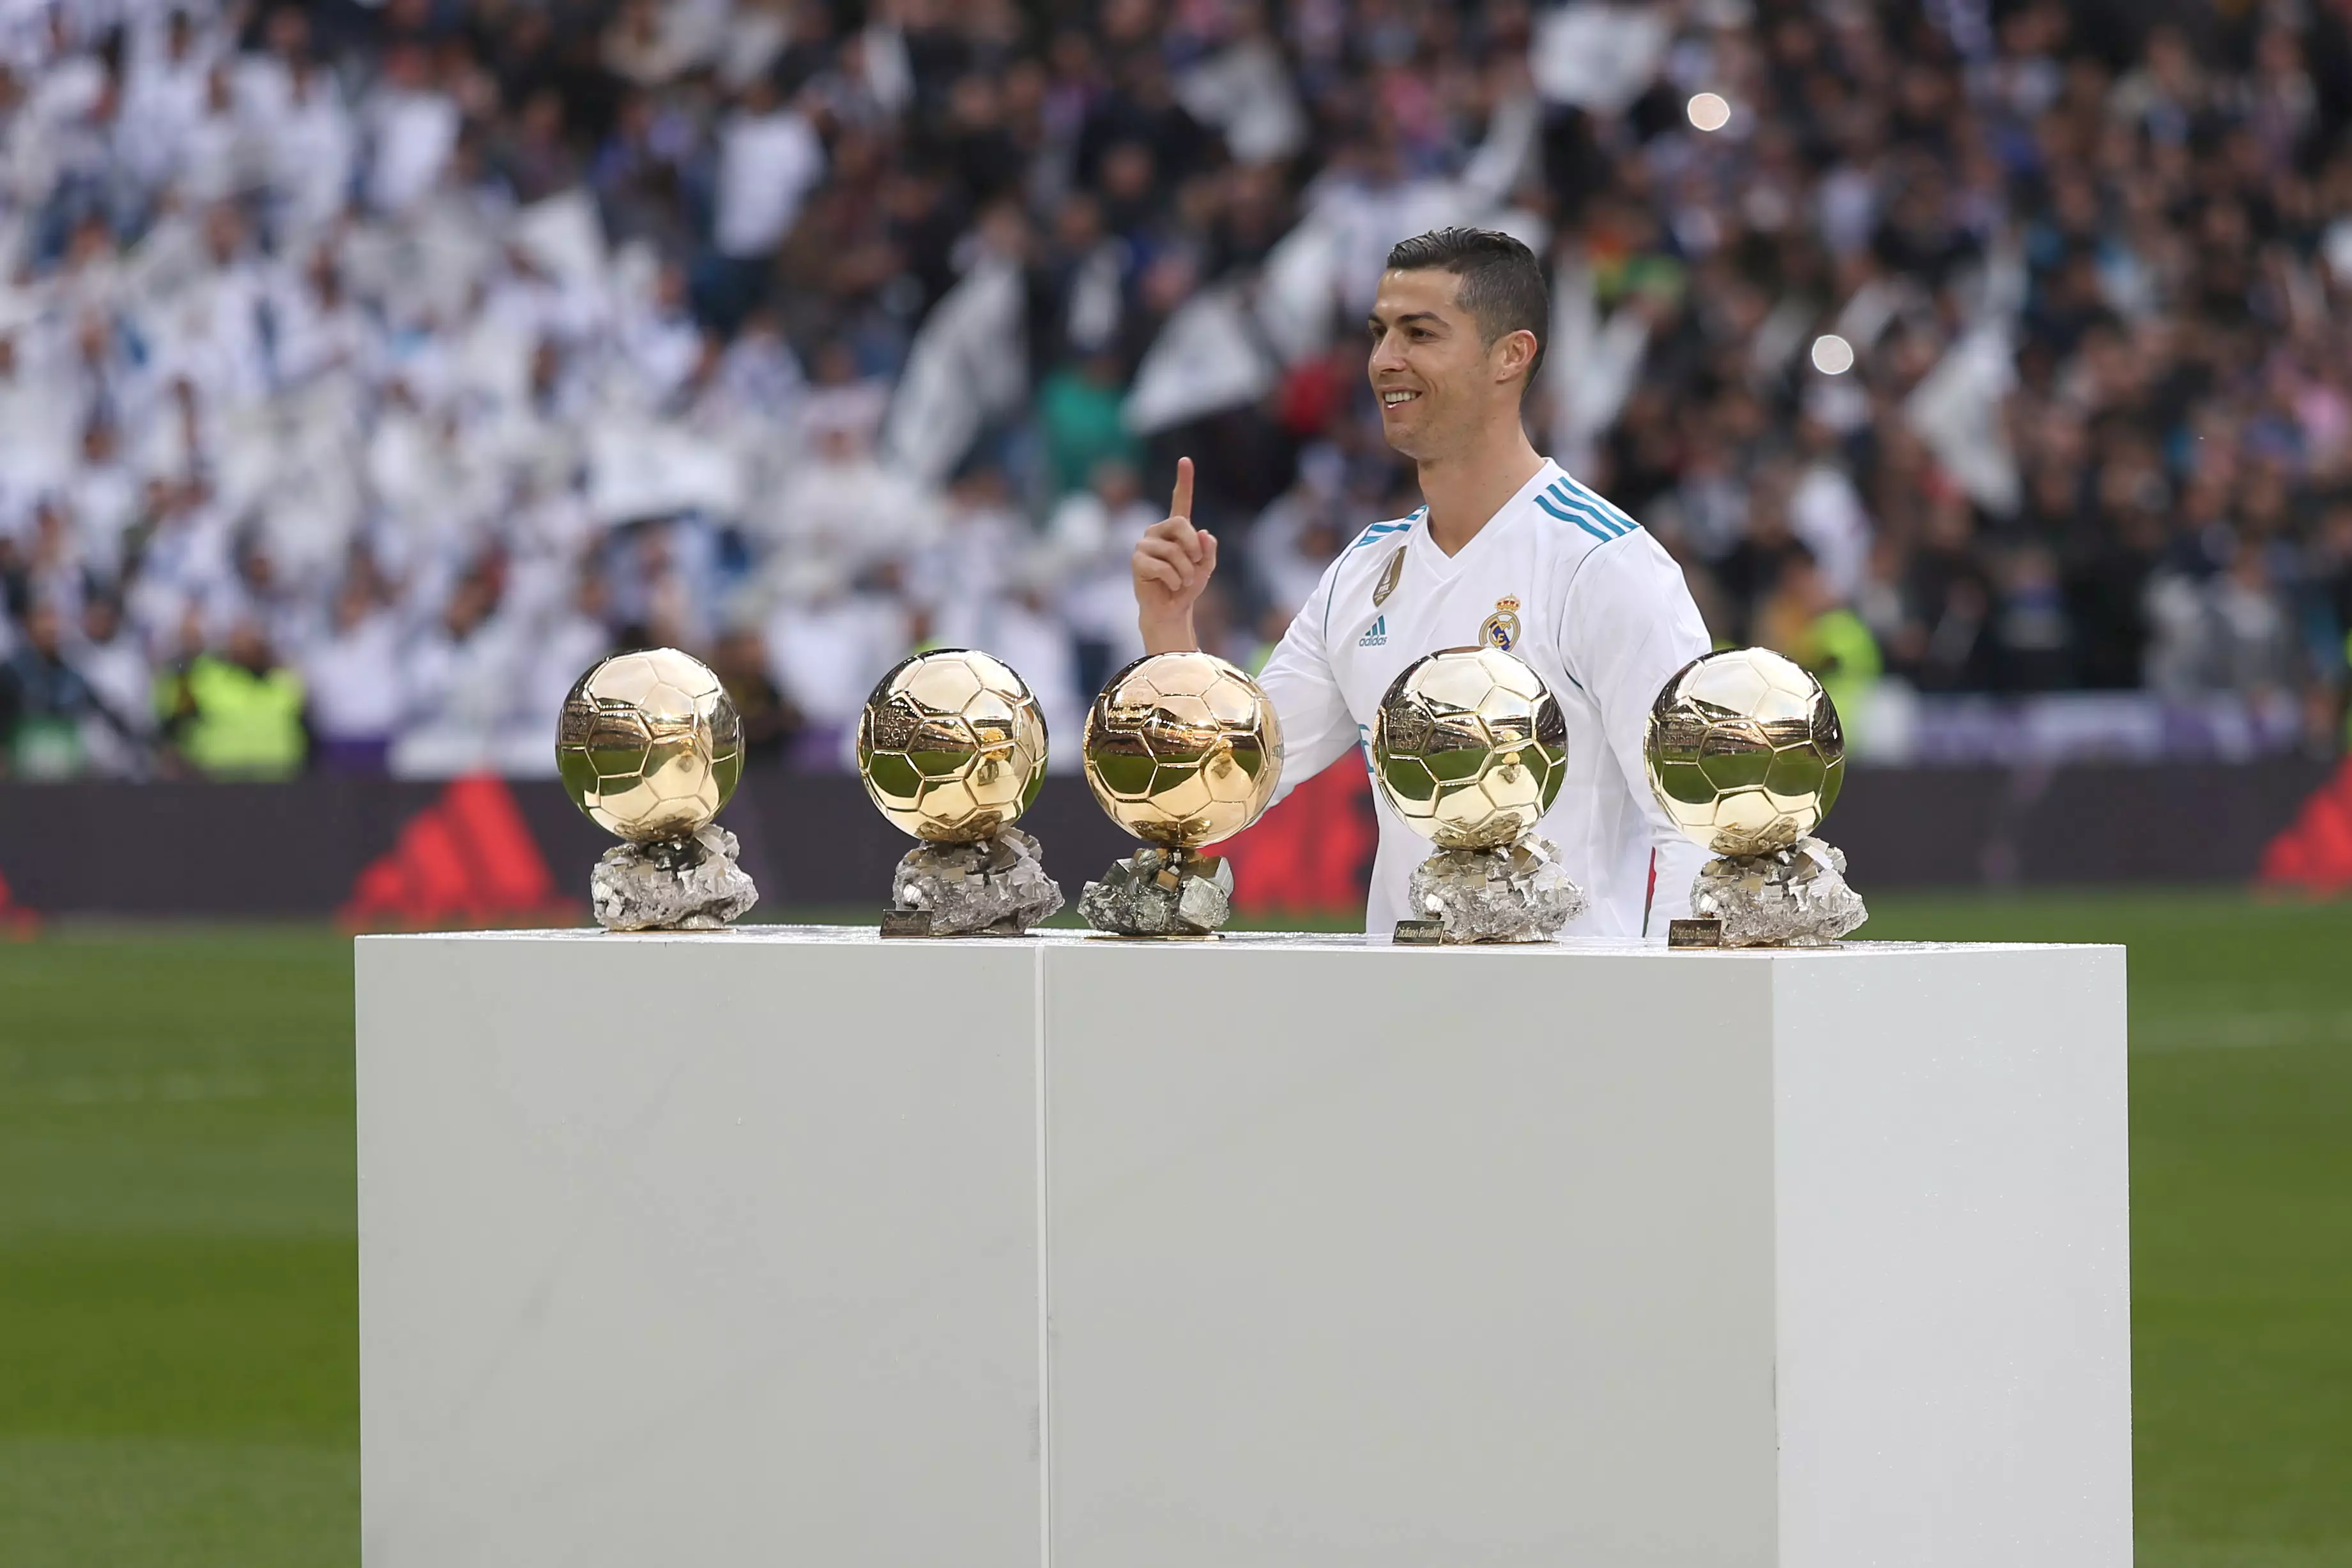 Are five trophies not enough? Image: PA Images